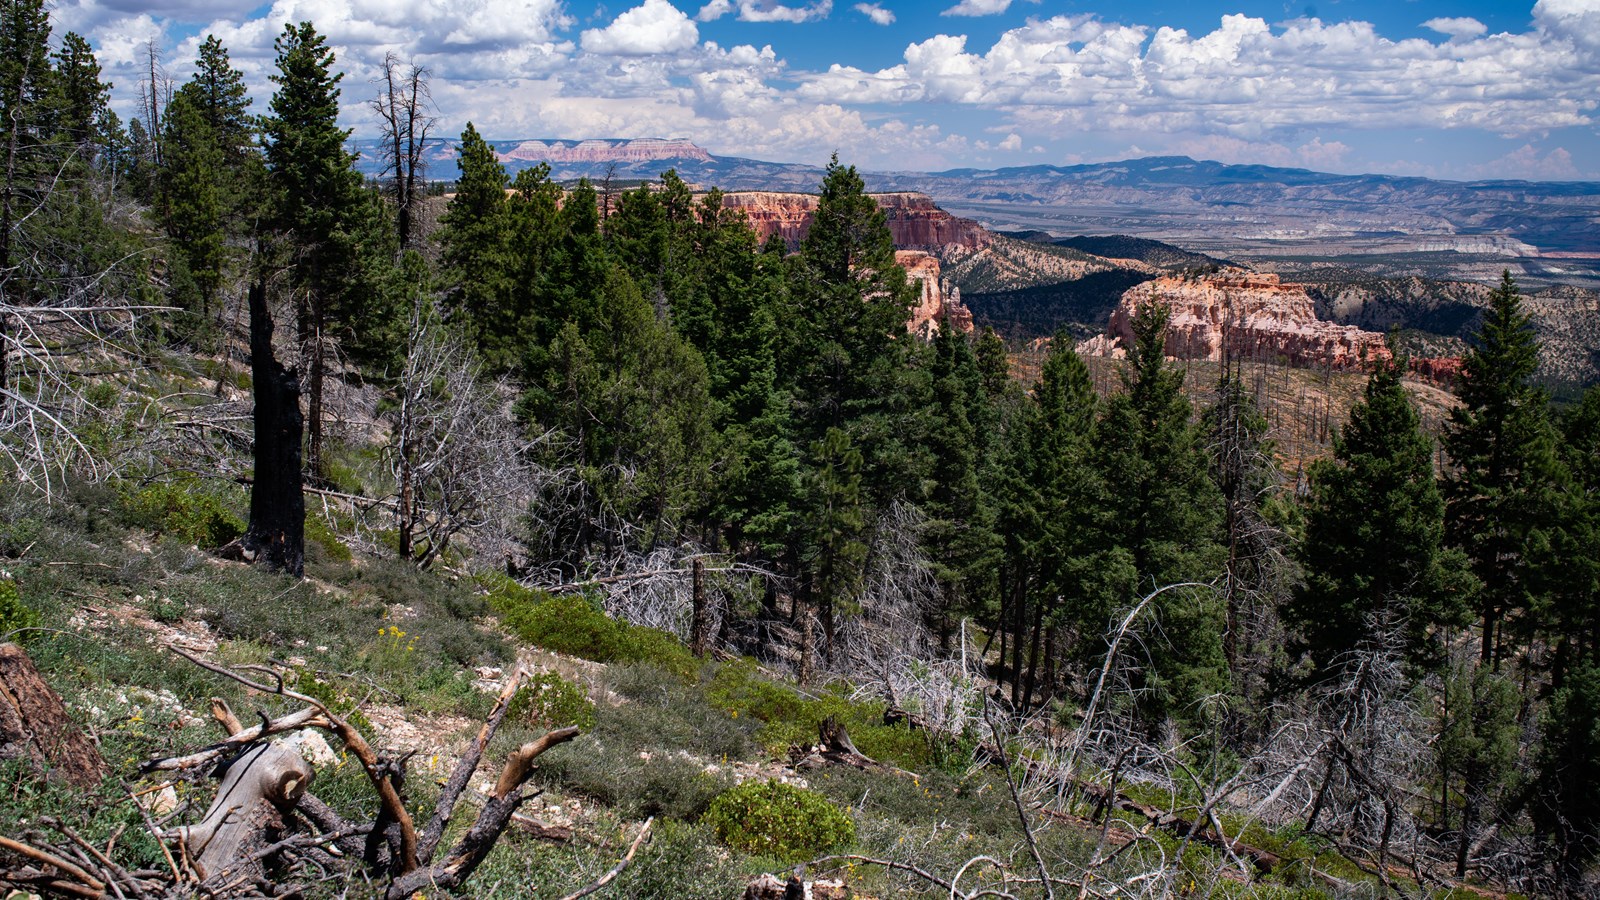 A forested slope foreground with red rock cliffs and plateaus beyond